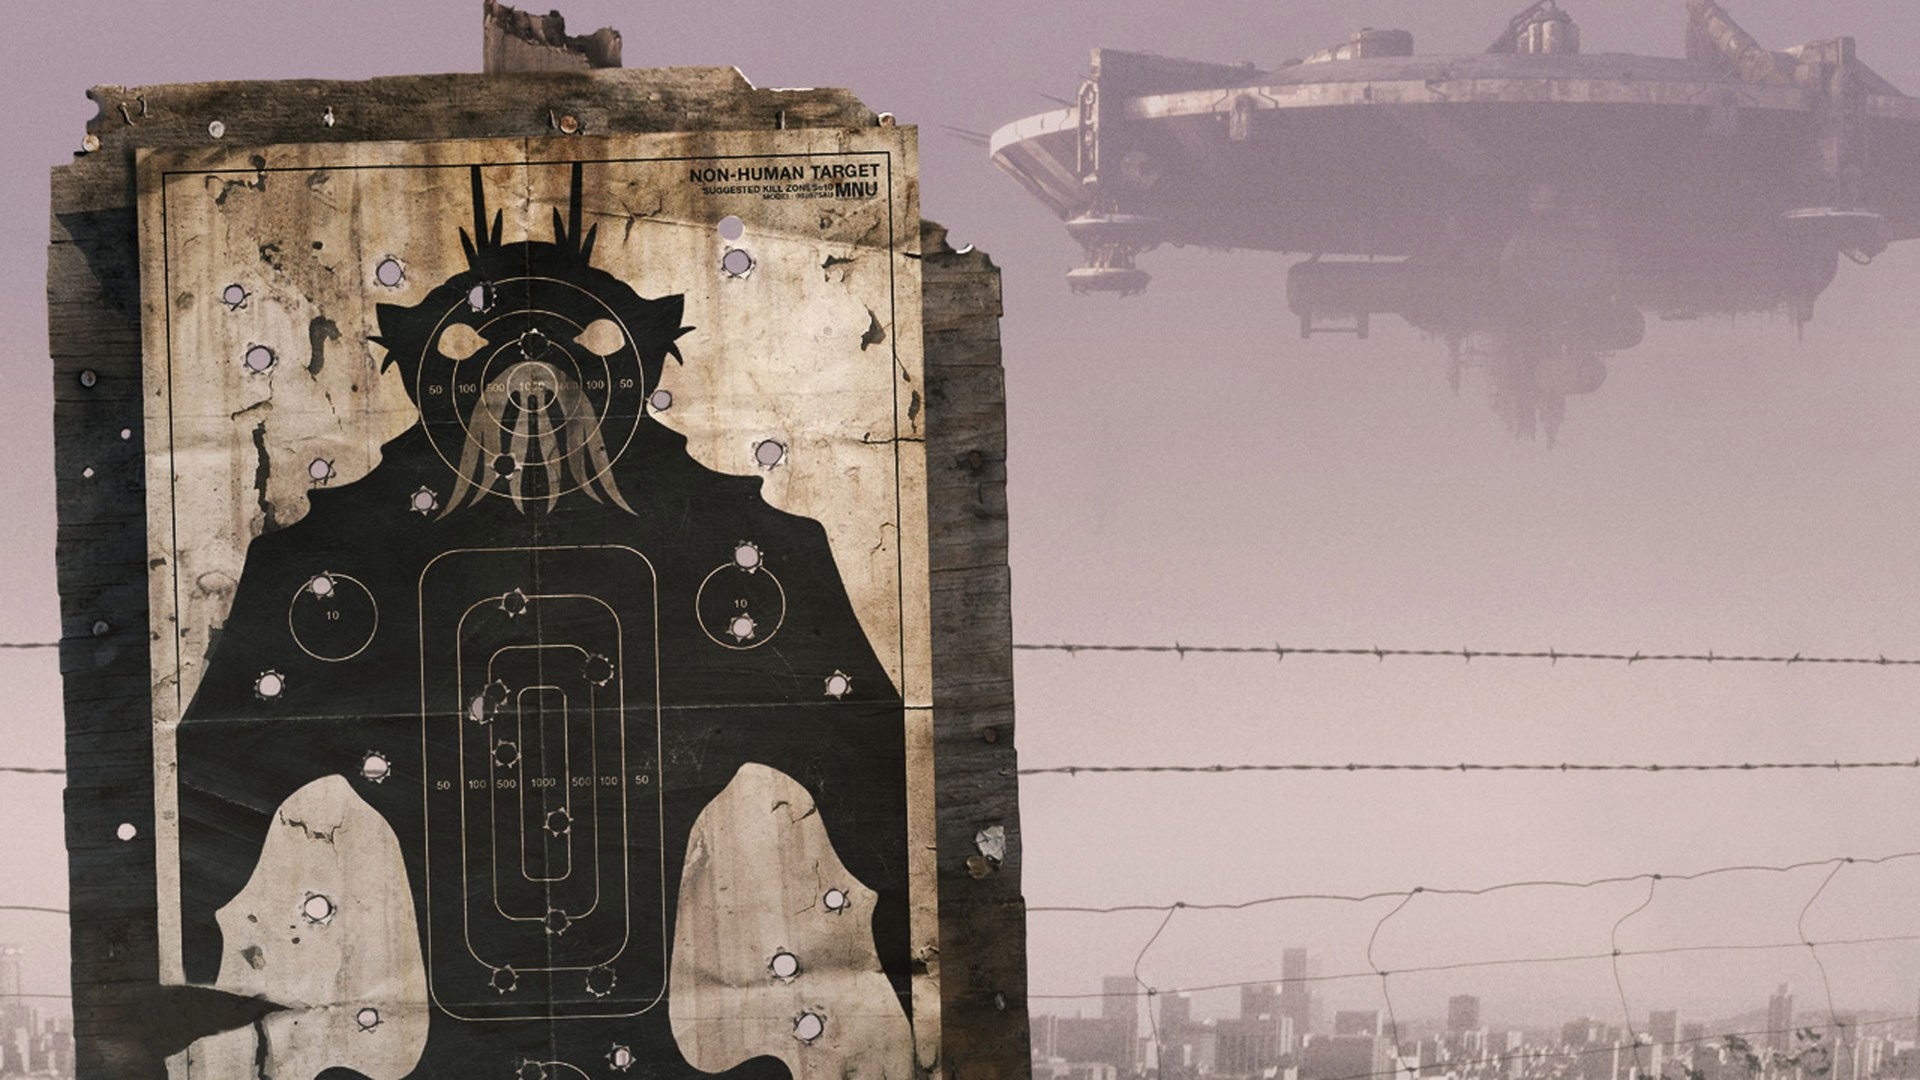 District 9: Produced for $30 million and shot on location in Chiawelo, Soweto, presenting fictional interviews, news footage, and video from surveillance cameras in a part-mock documentary-style format. 1920x1080 Full HD Background.